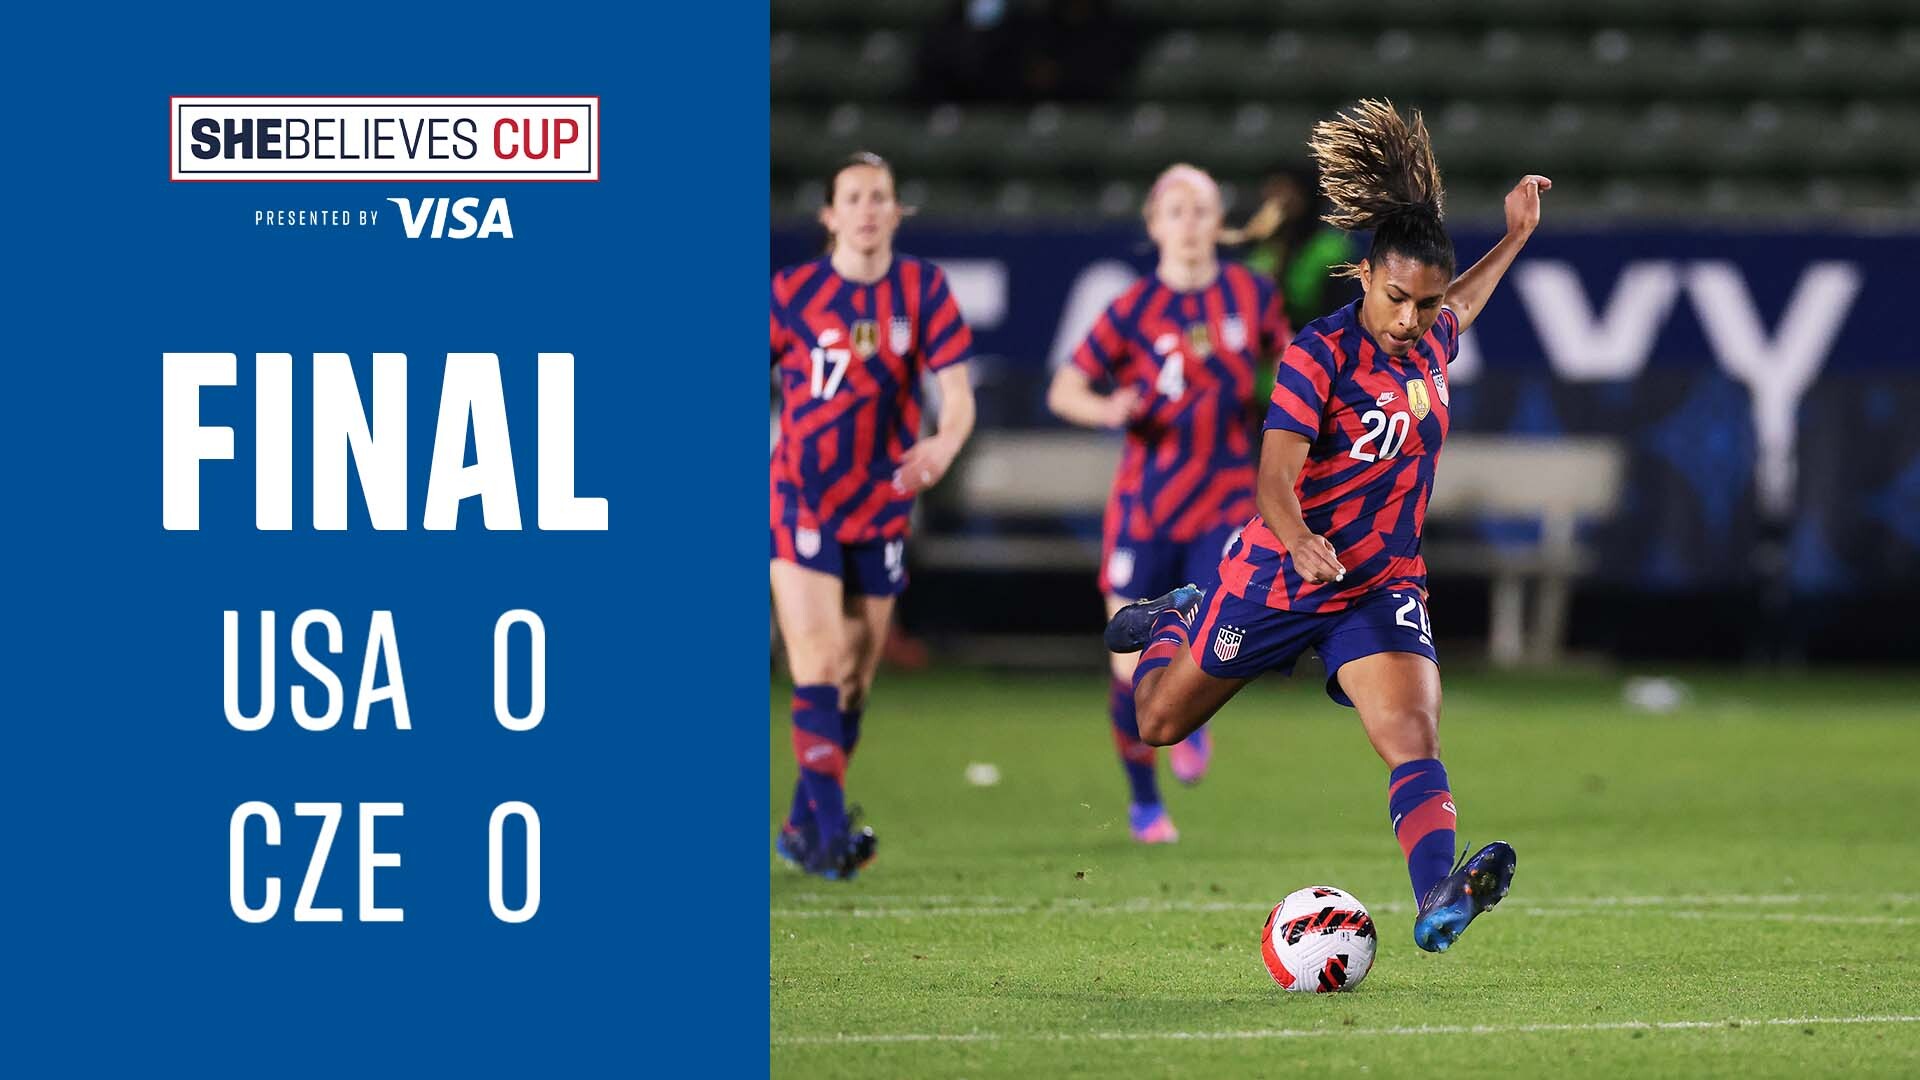 U.S. Women's National Team Opens 2022 With Hard-Fought 0-0 Draw Against  Czech Republic In SheBelieves Cup, Presented By Visa